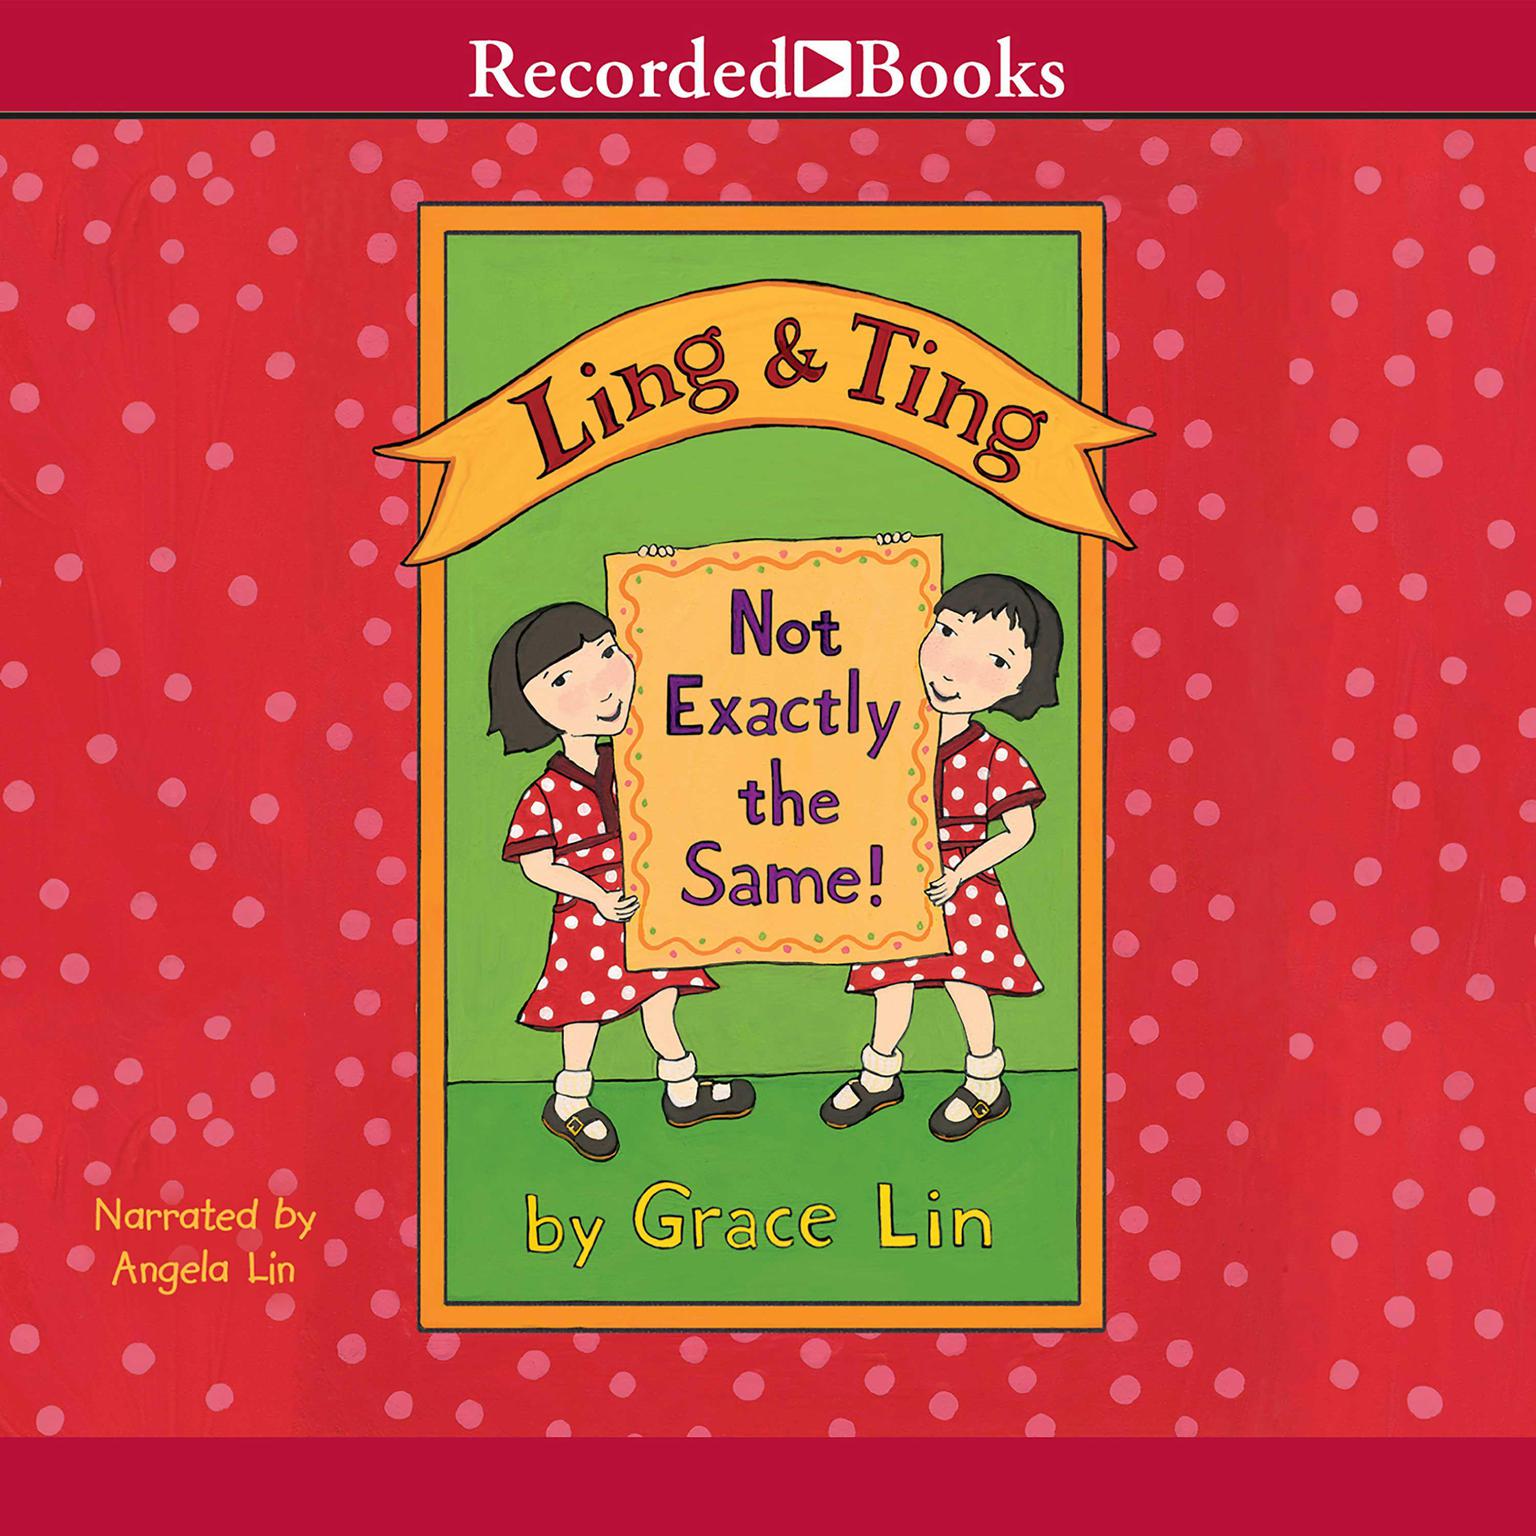 Ling & Ting: Not Exactly the Same! Audiobook, by Grace Lin